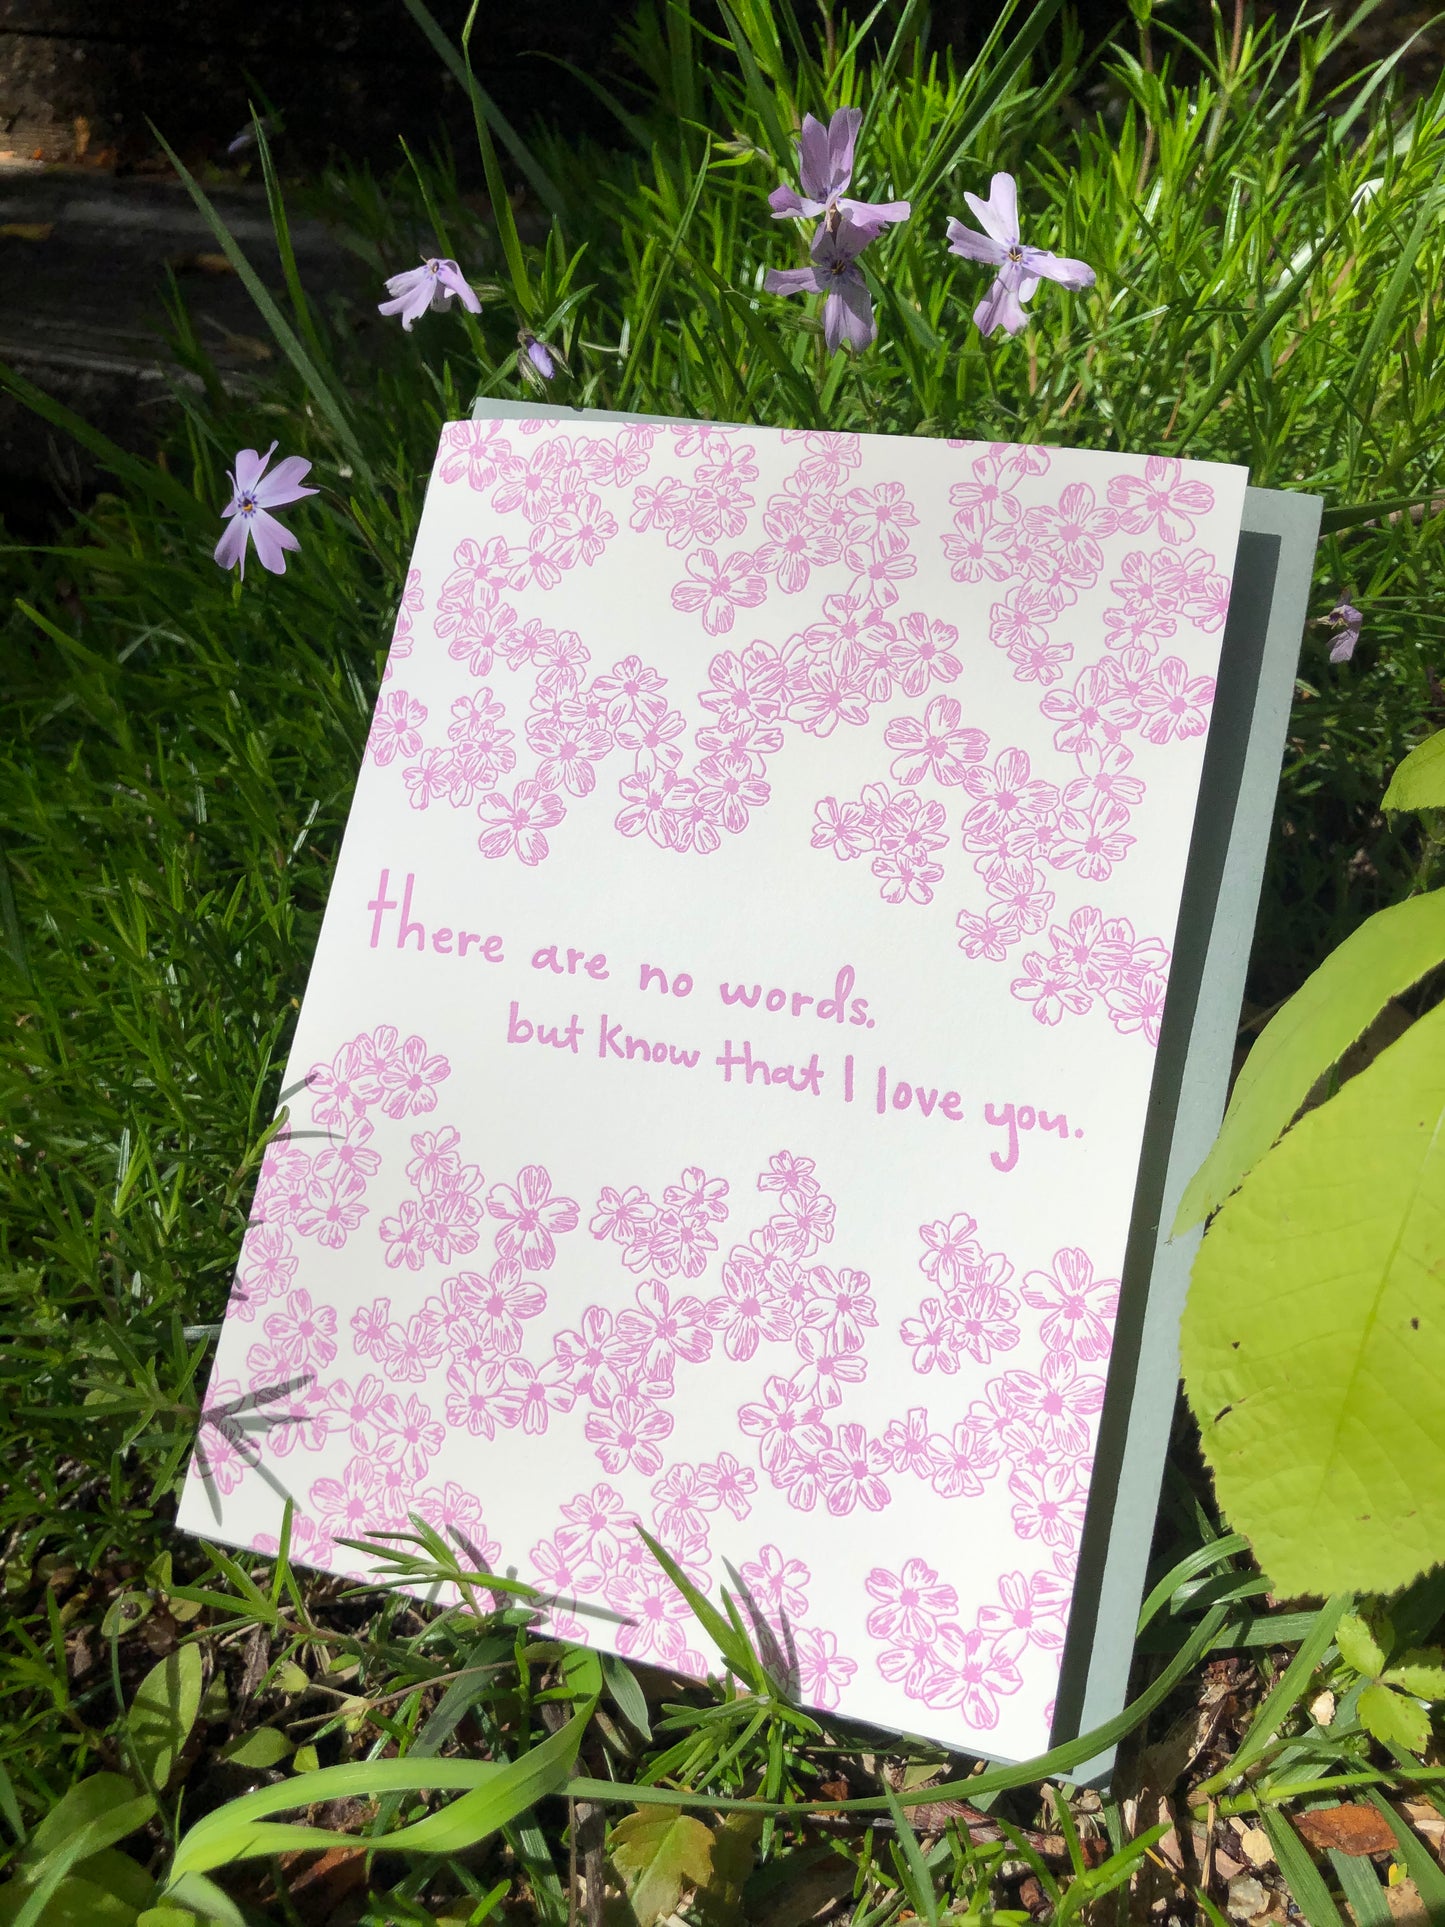 Letterpress greeting card featuring hand-drawn phlox flowers, printed in vibrant lavender ink. Whimsical hand-drawn text saying "There are no words, but know that I love you" is shown in the center of the card, in the same lavender ink. The card is white, blank inside, and is paired with a slate gray envelope. The card is shown outside with light purple phlox on a sunny spring day. 